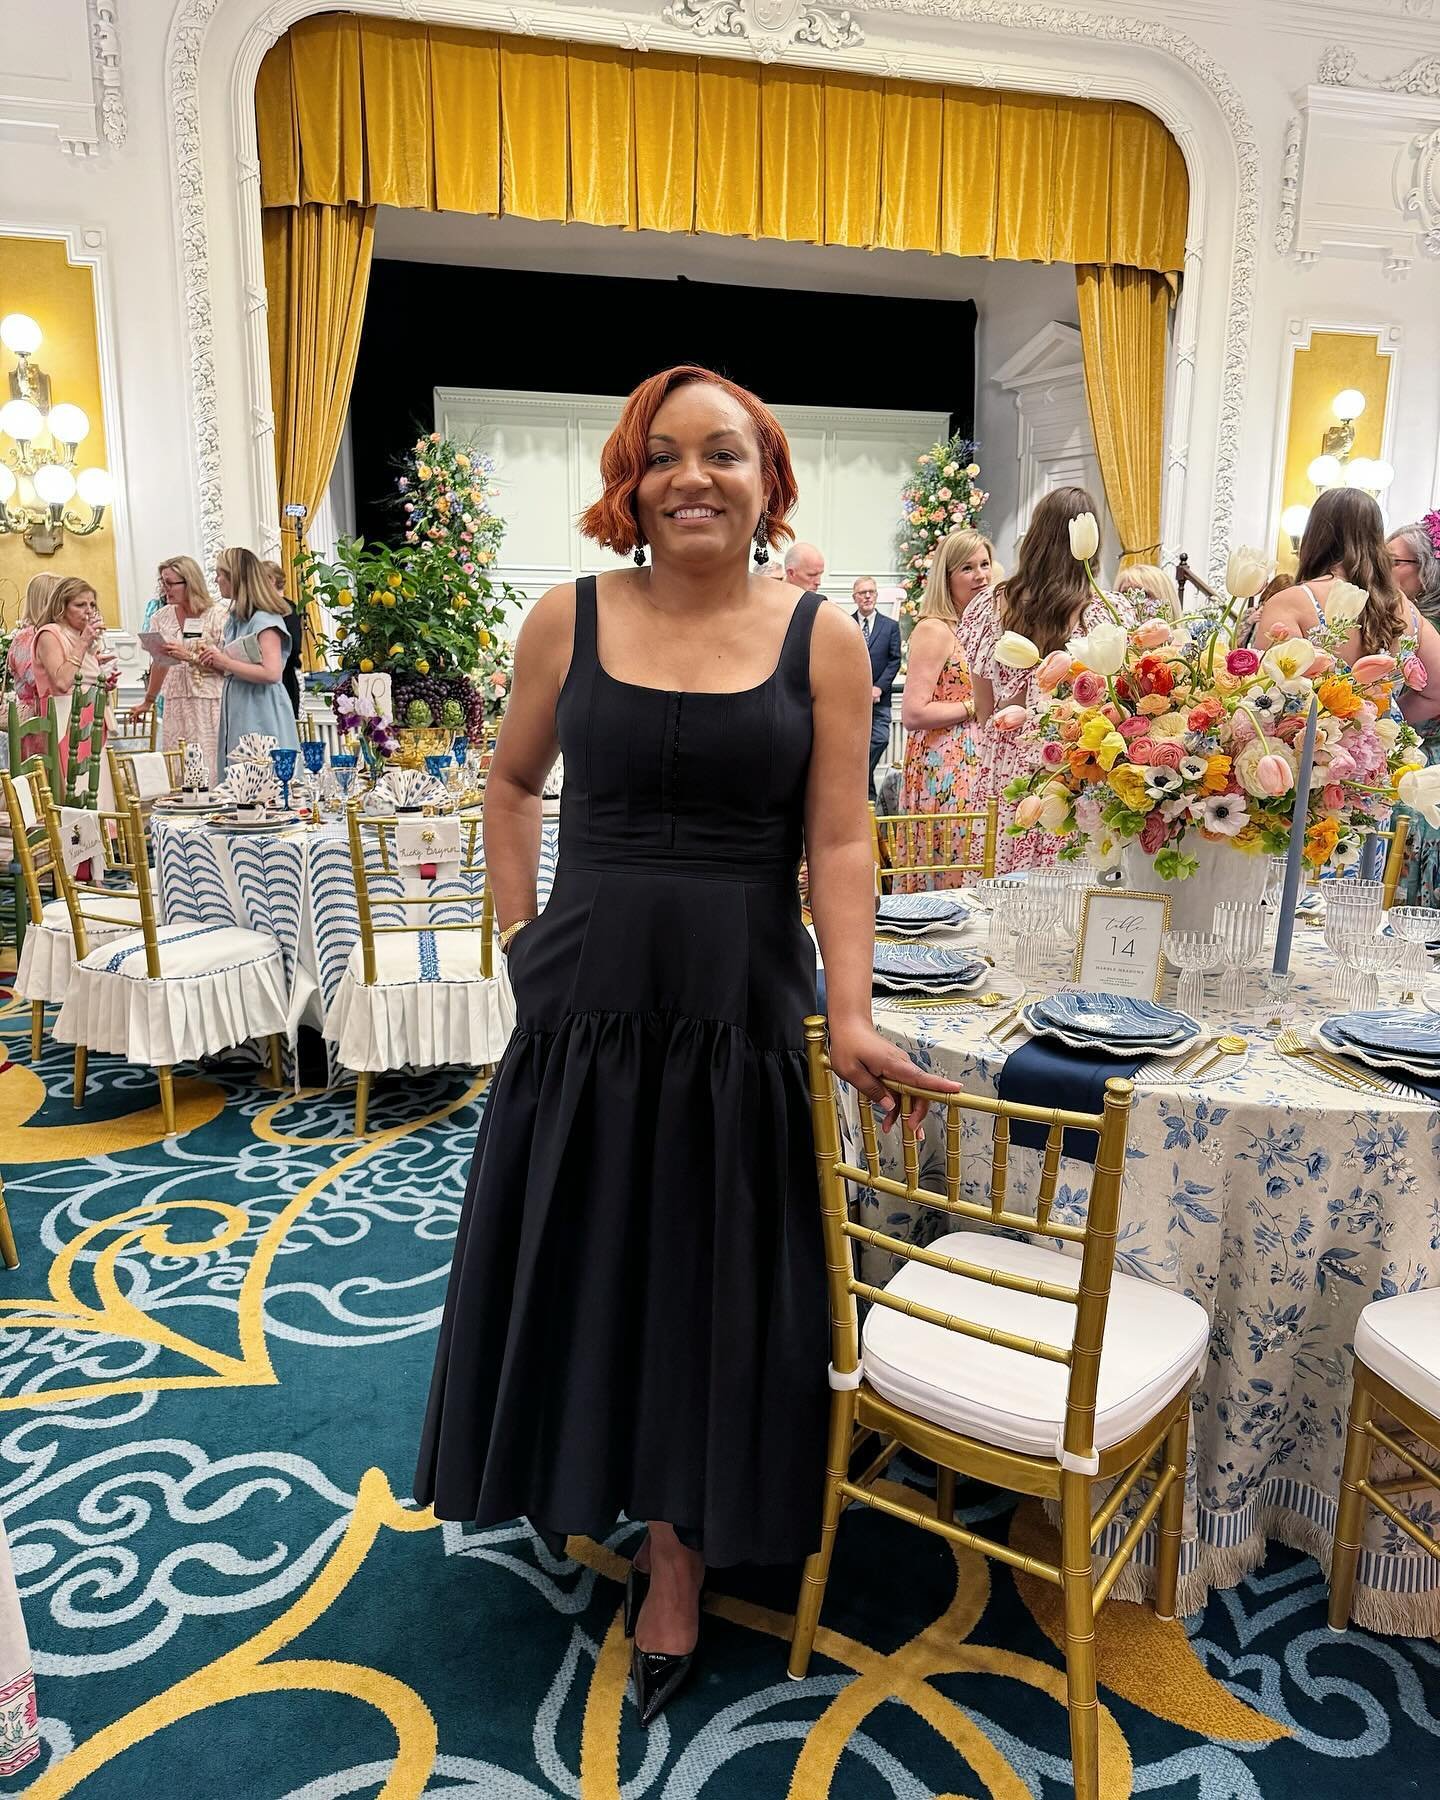 One week ago today I was heading to Richmond to participate in the @lhvatablescapes event to support the wonderful organization @littlehandsva. It was so fun to see all the beautiful table designs by a group of amazing designers in the Richmond and D